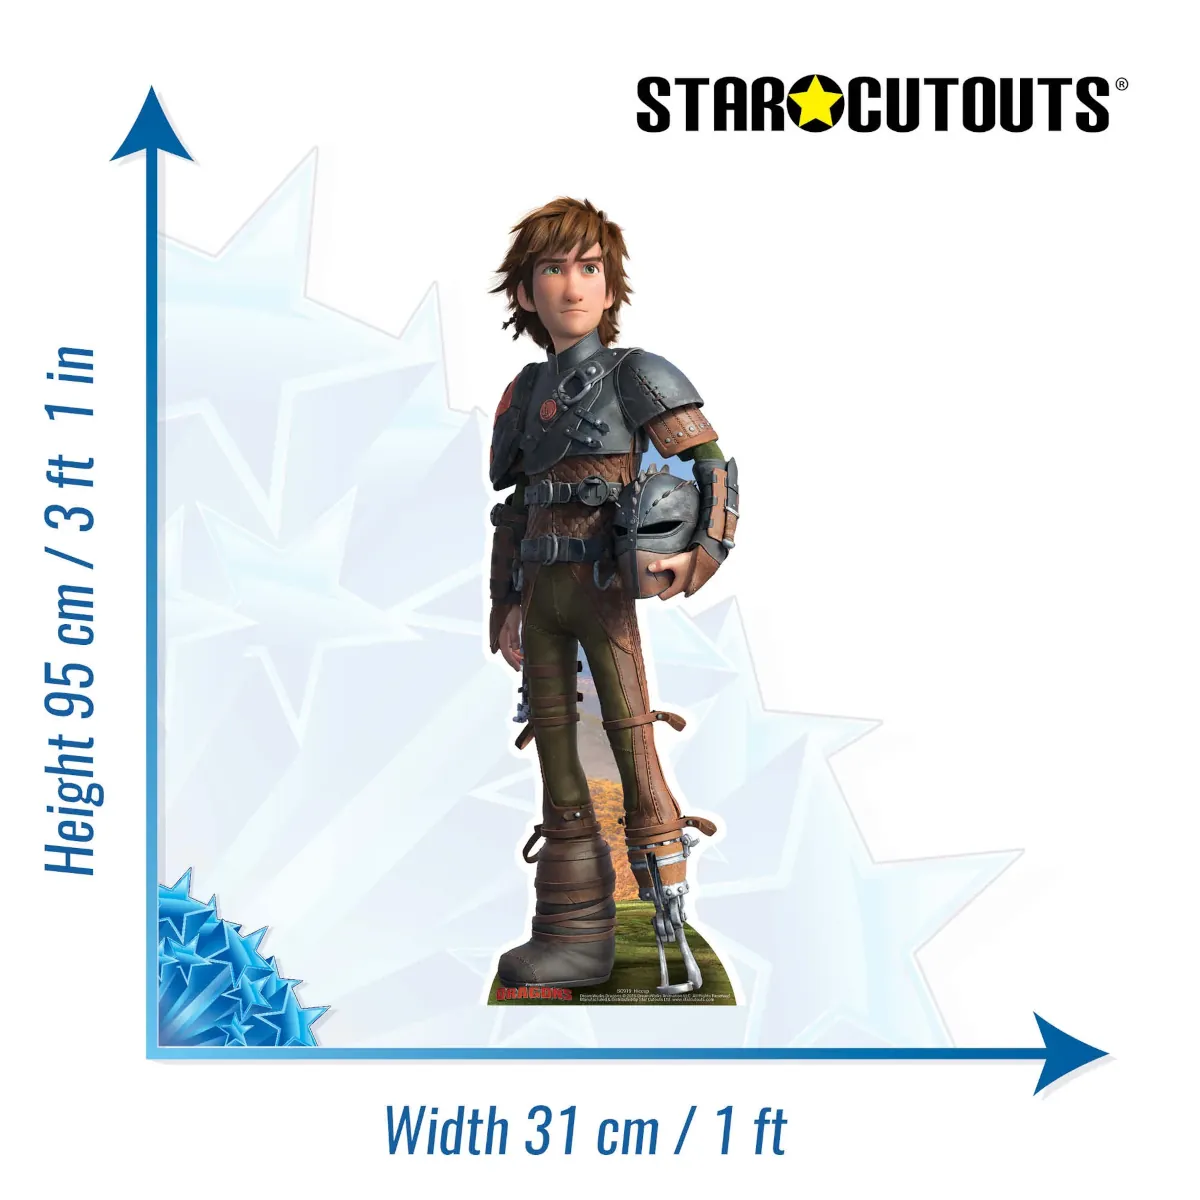 SC919 Hiccup (How To Train Your Dragon) Official Mini Cardboard Cutout Standee Size